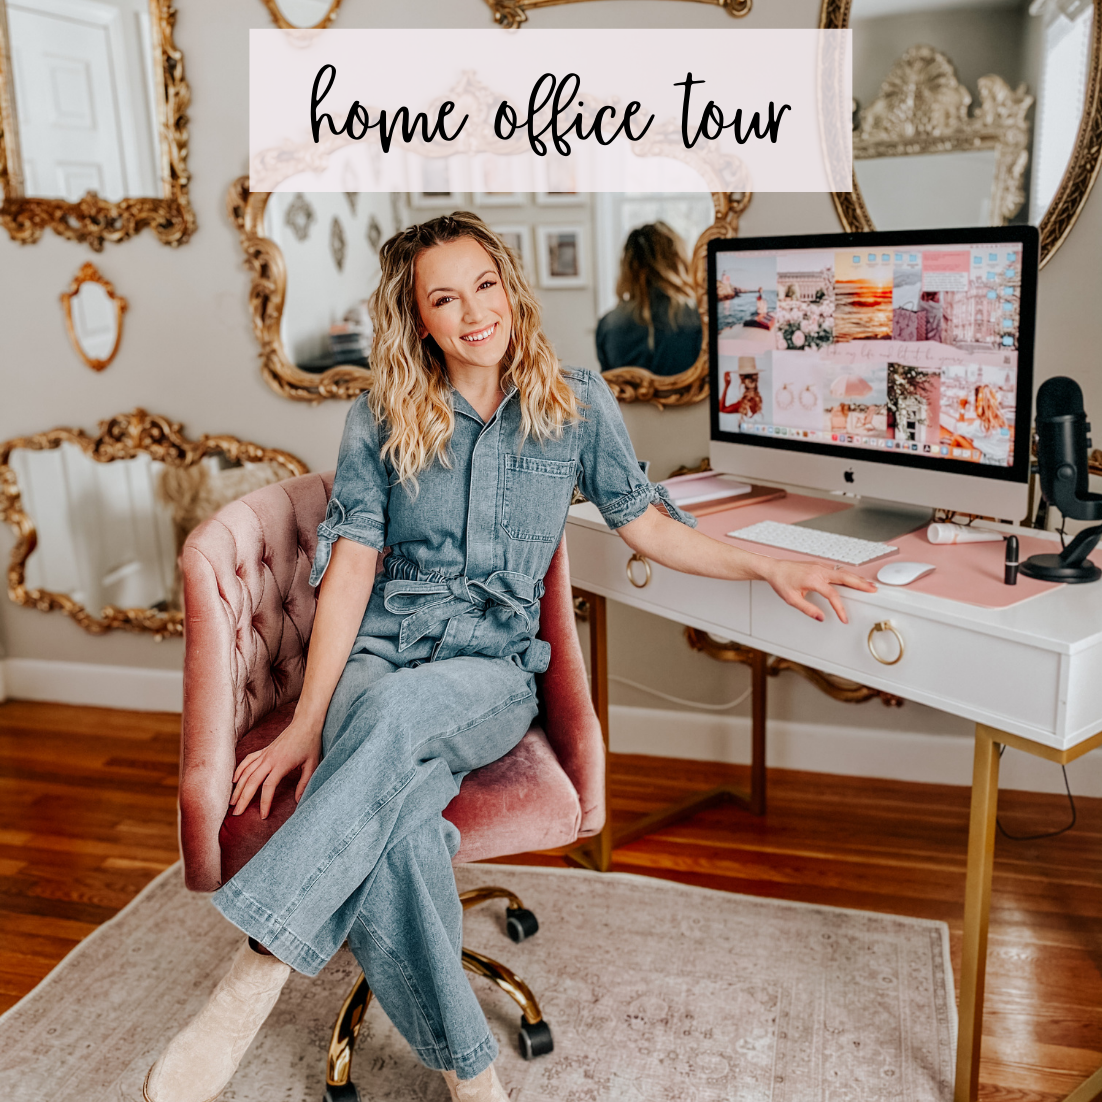 Home Office Tour - Details and Swirls